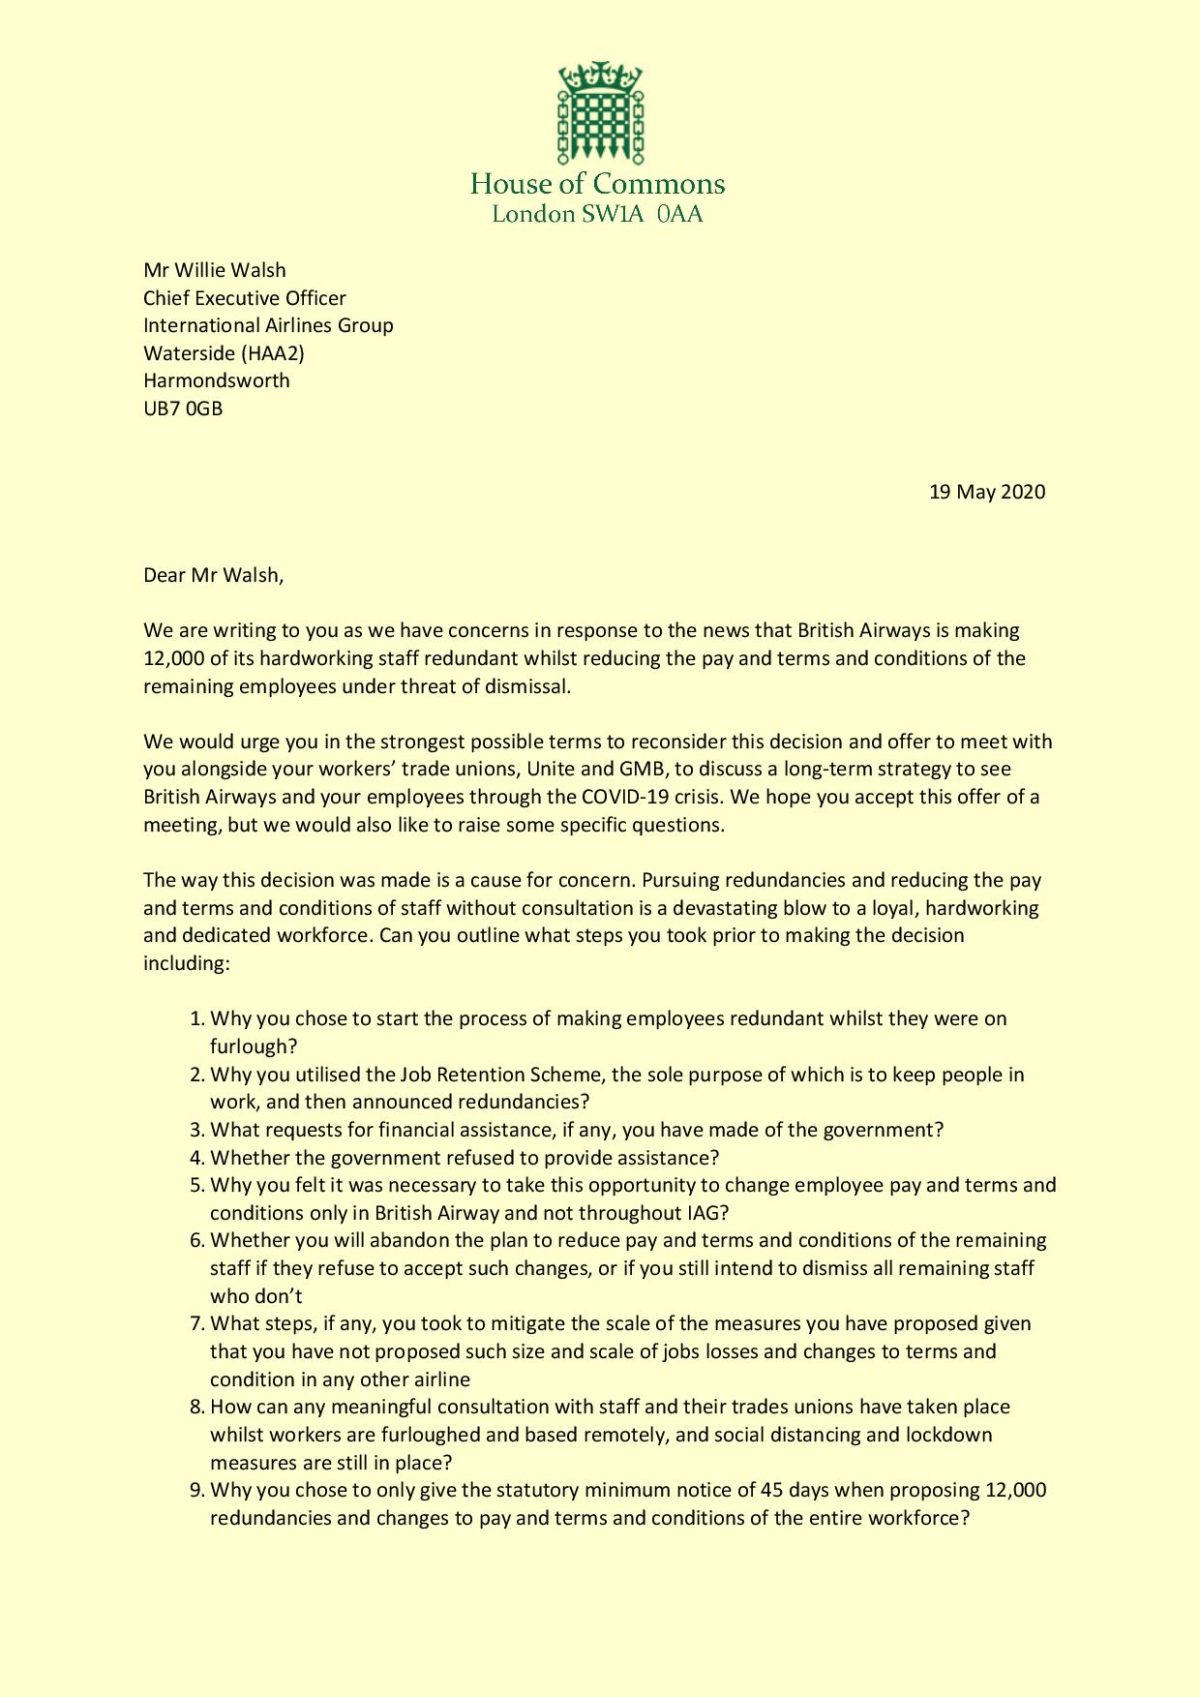 Letter to IAG CEO, page 1